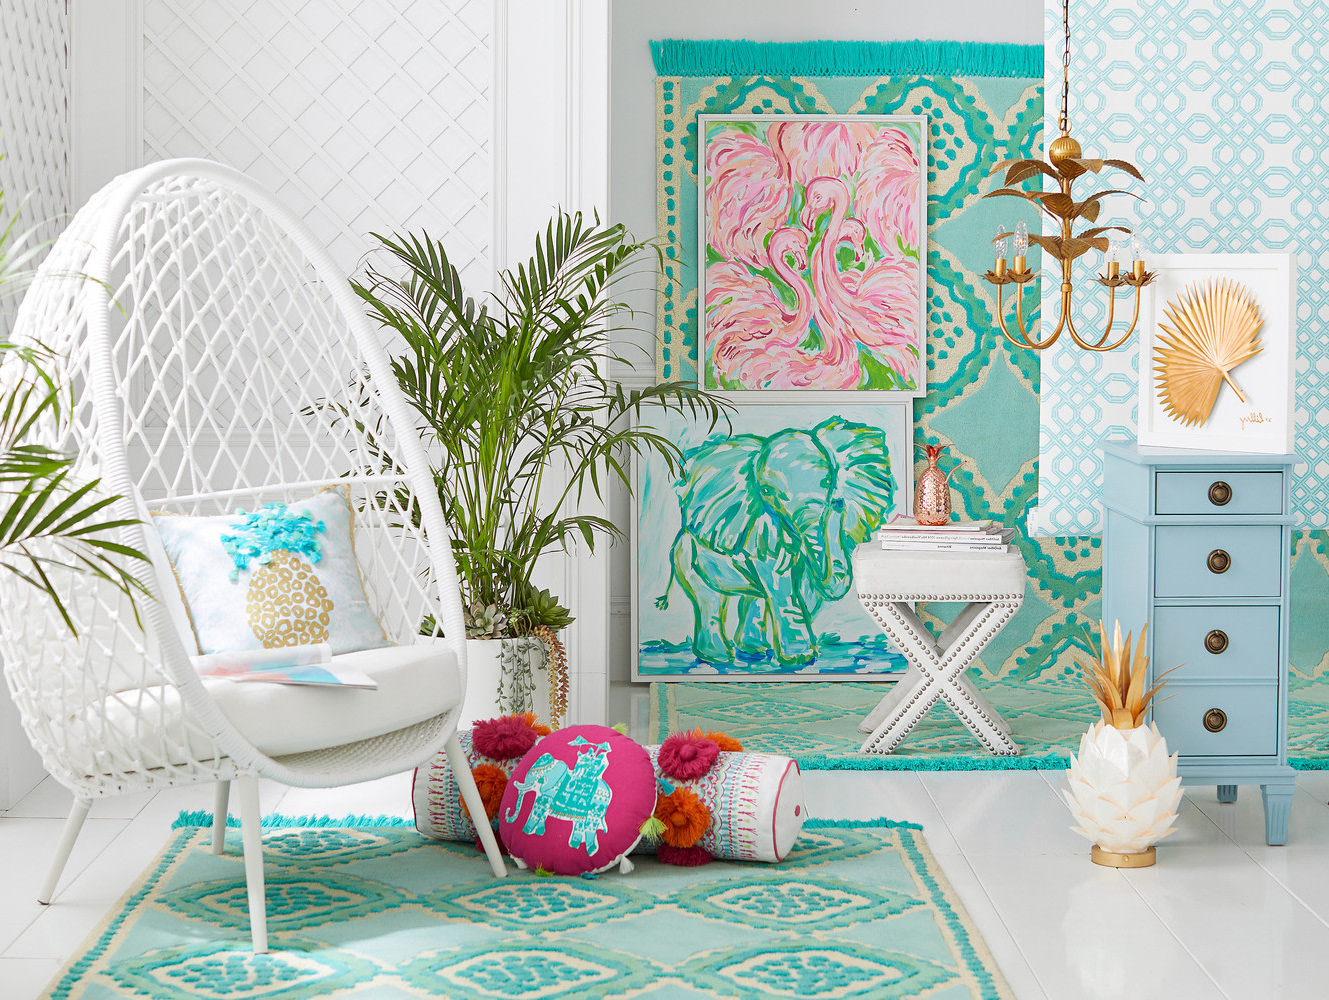 Pottery Barn Lilly Pulitzer Home Line Launch March 2018